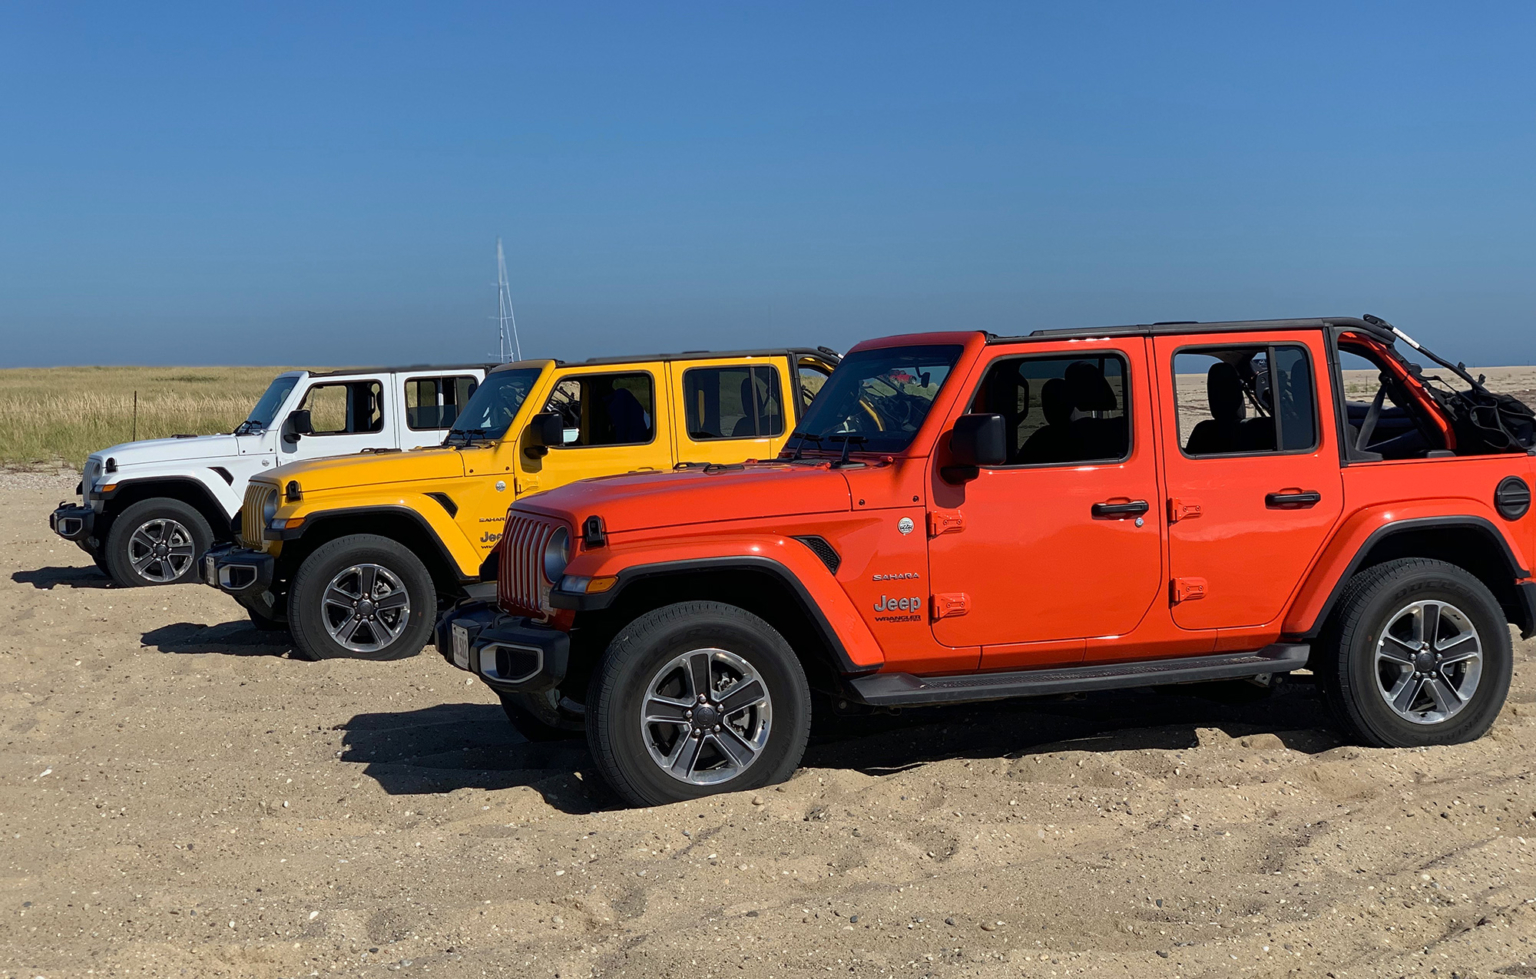 Nantucket Jeep, Auto and Car Rental From Nantucket Island